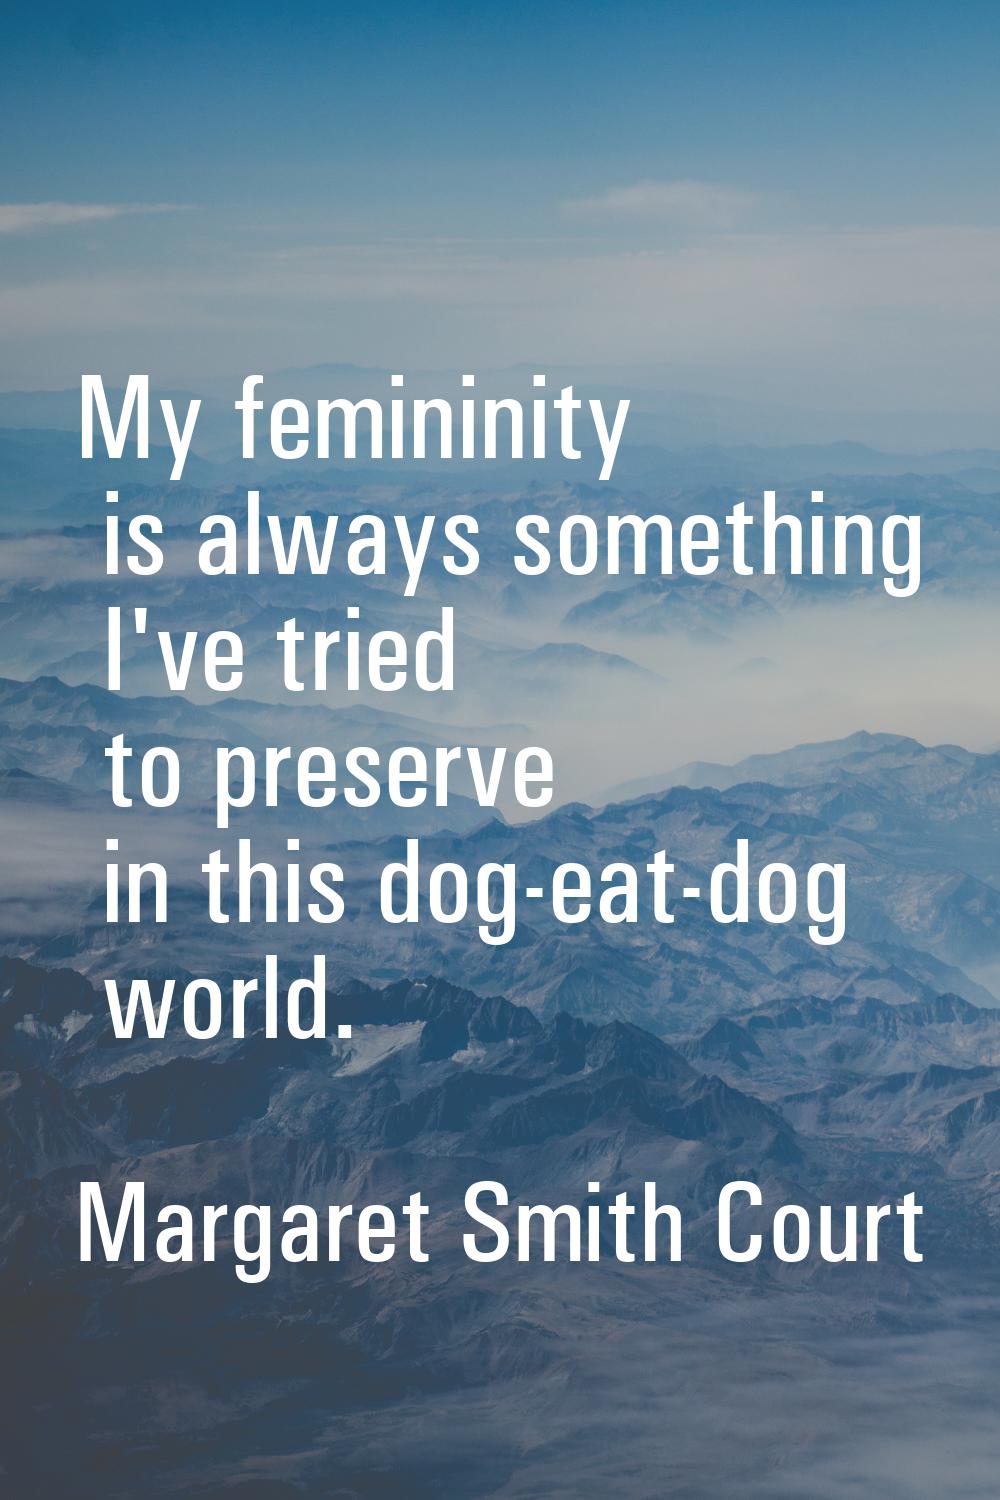 My femininity is always something I've tried to preserve in this dog-eat-dog world.